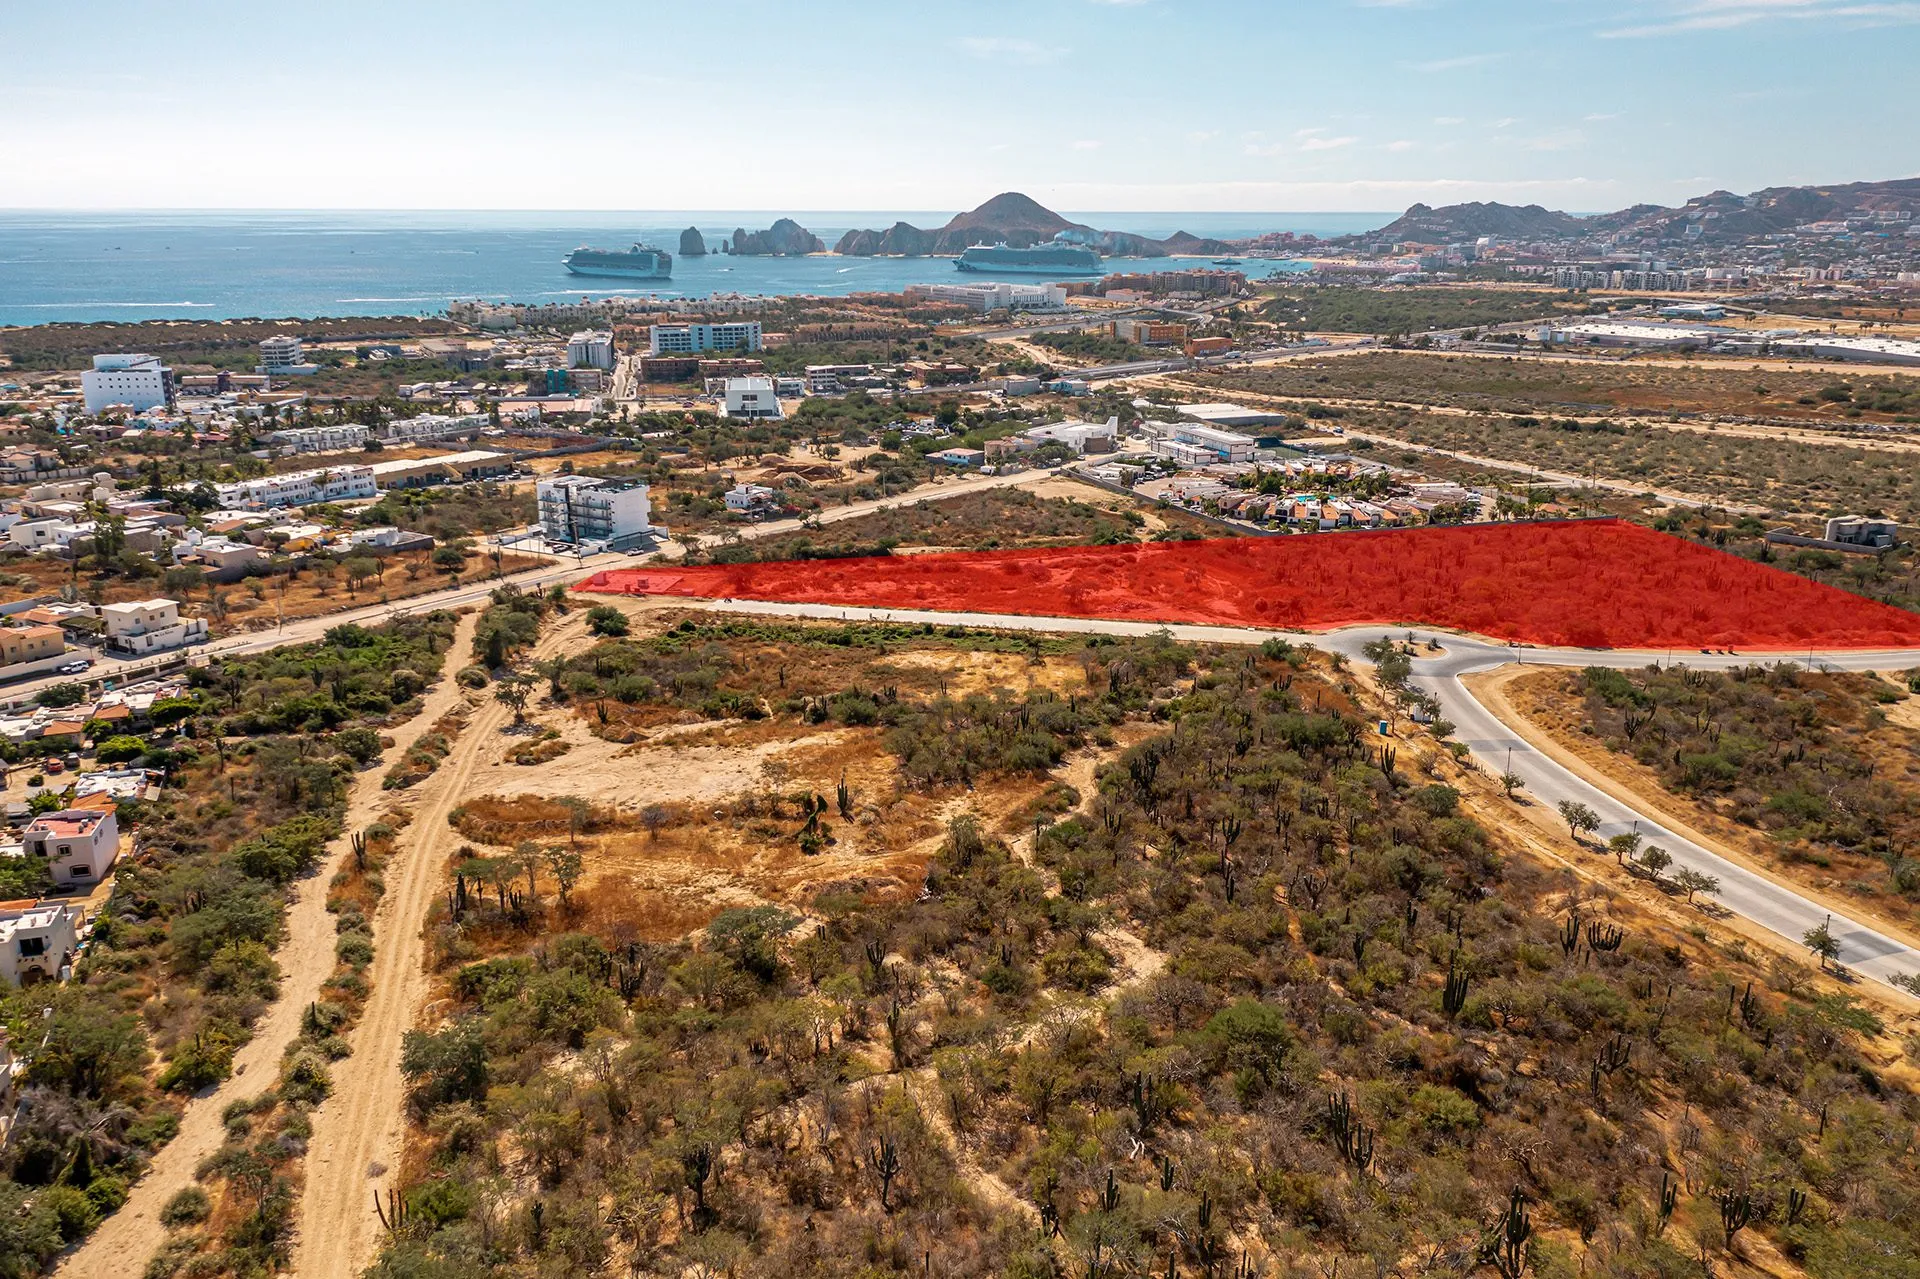 Lot I, is an excellent option for comercial and/or residential development. This 8.7 acre development parcel is located inside one of the most popular communities in Los Cabos.